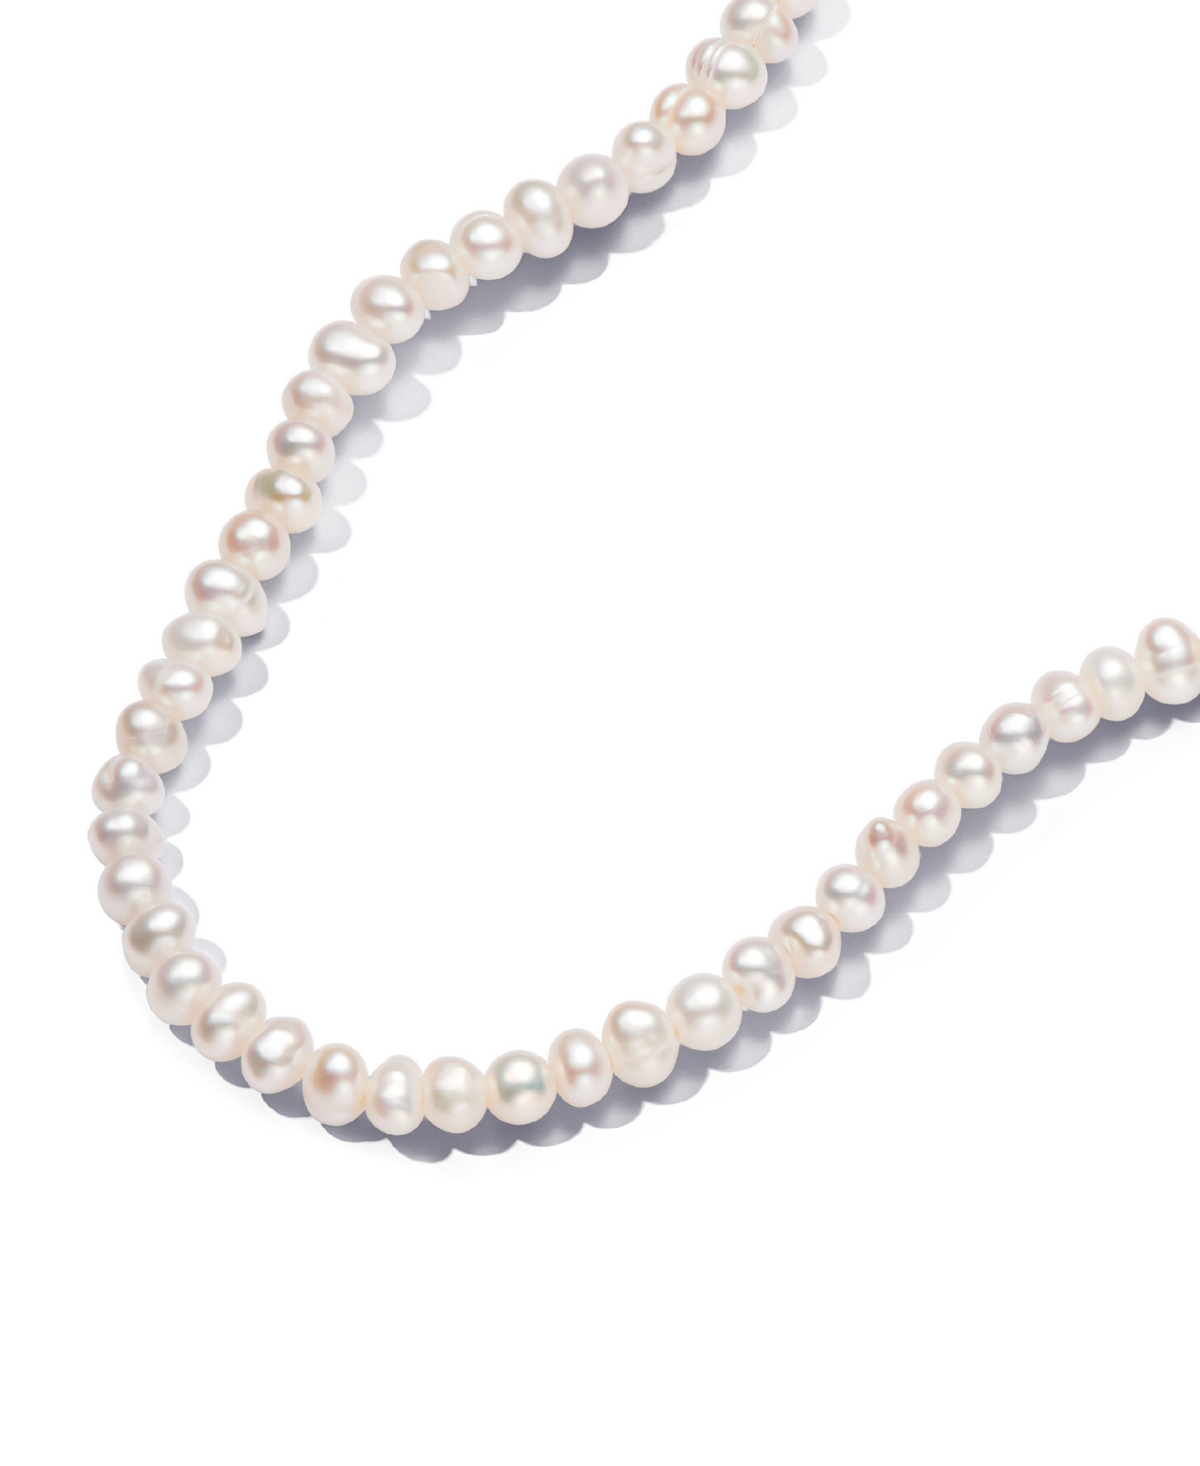 Treated Freshwater Cultured Pearls T-bar Collier 17.7 inch Necklace - Gold